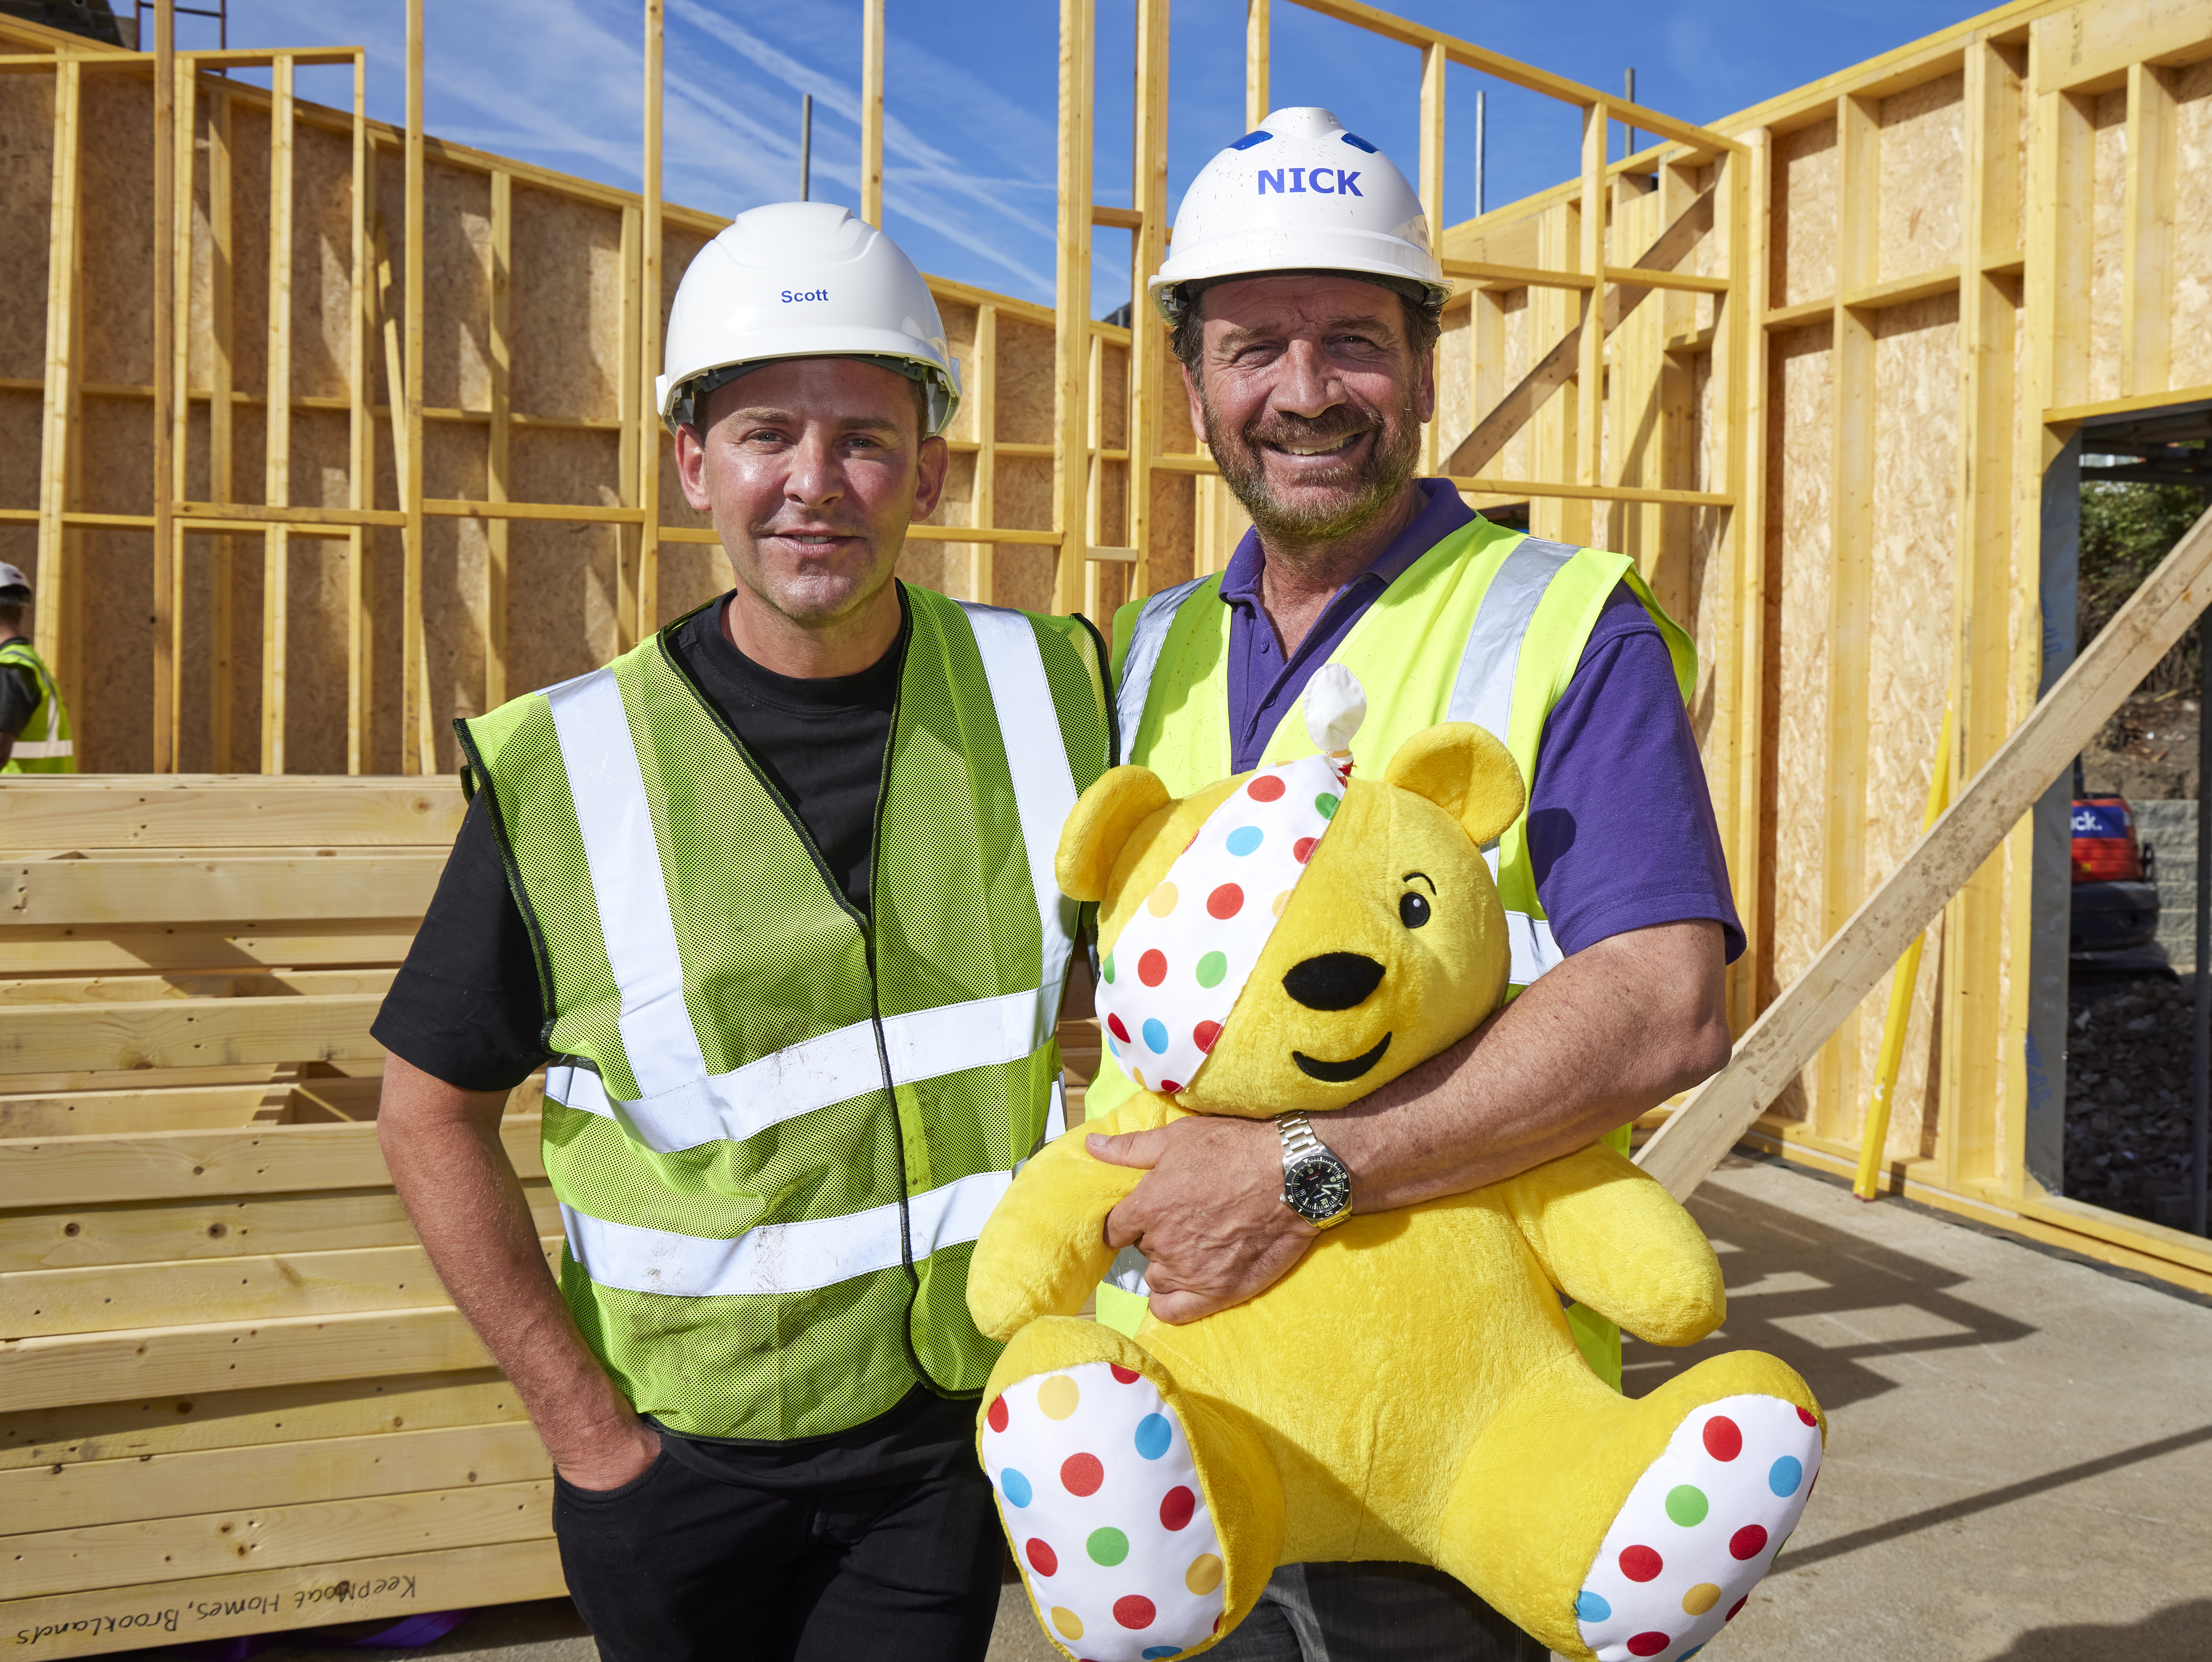 Scott Mills and Nick Knowles stand on the building site, wearing high-vis jackets and hard hats.  Nick is holding on to a stuffed Pudsey Bear